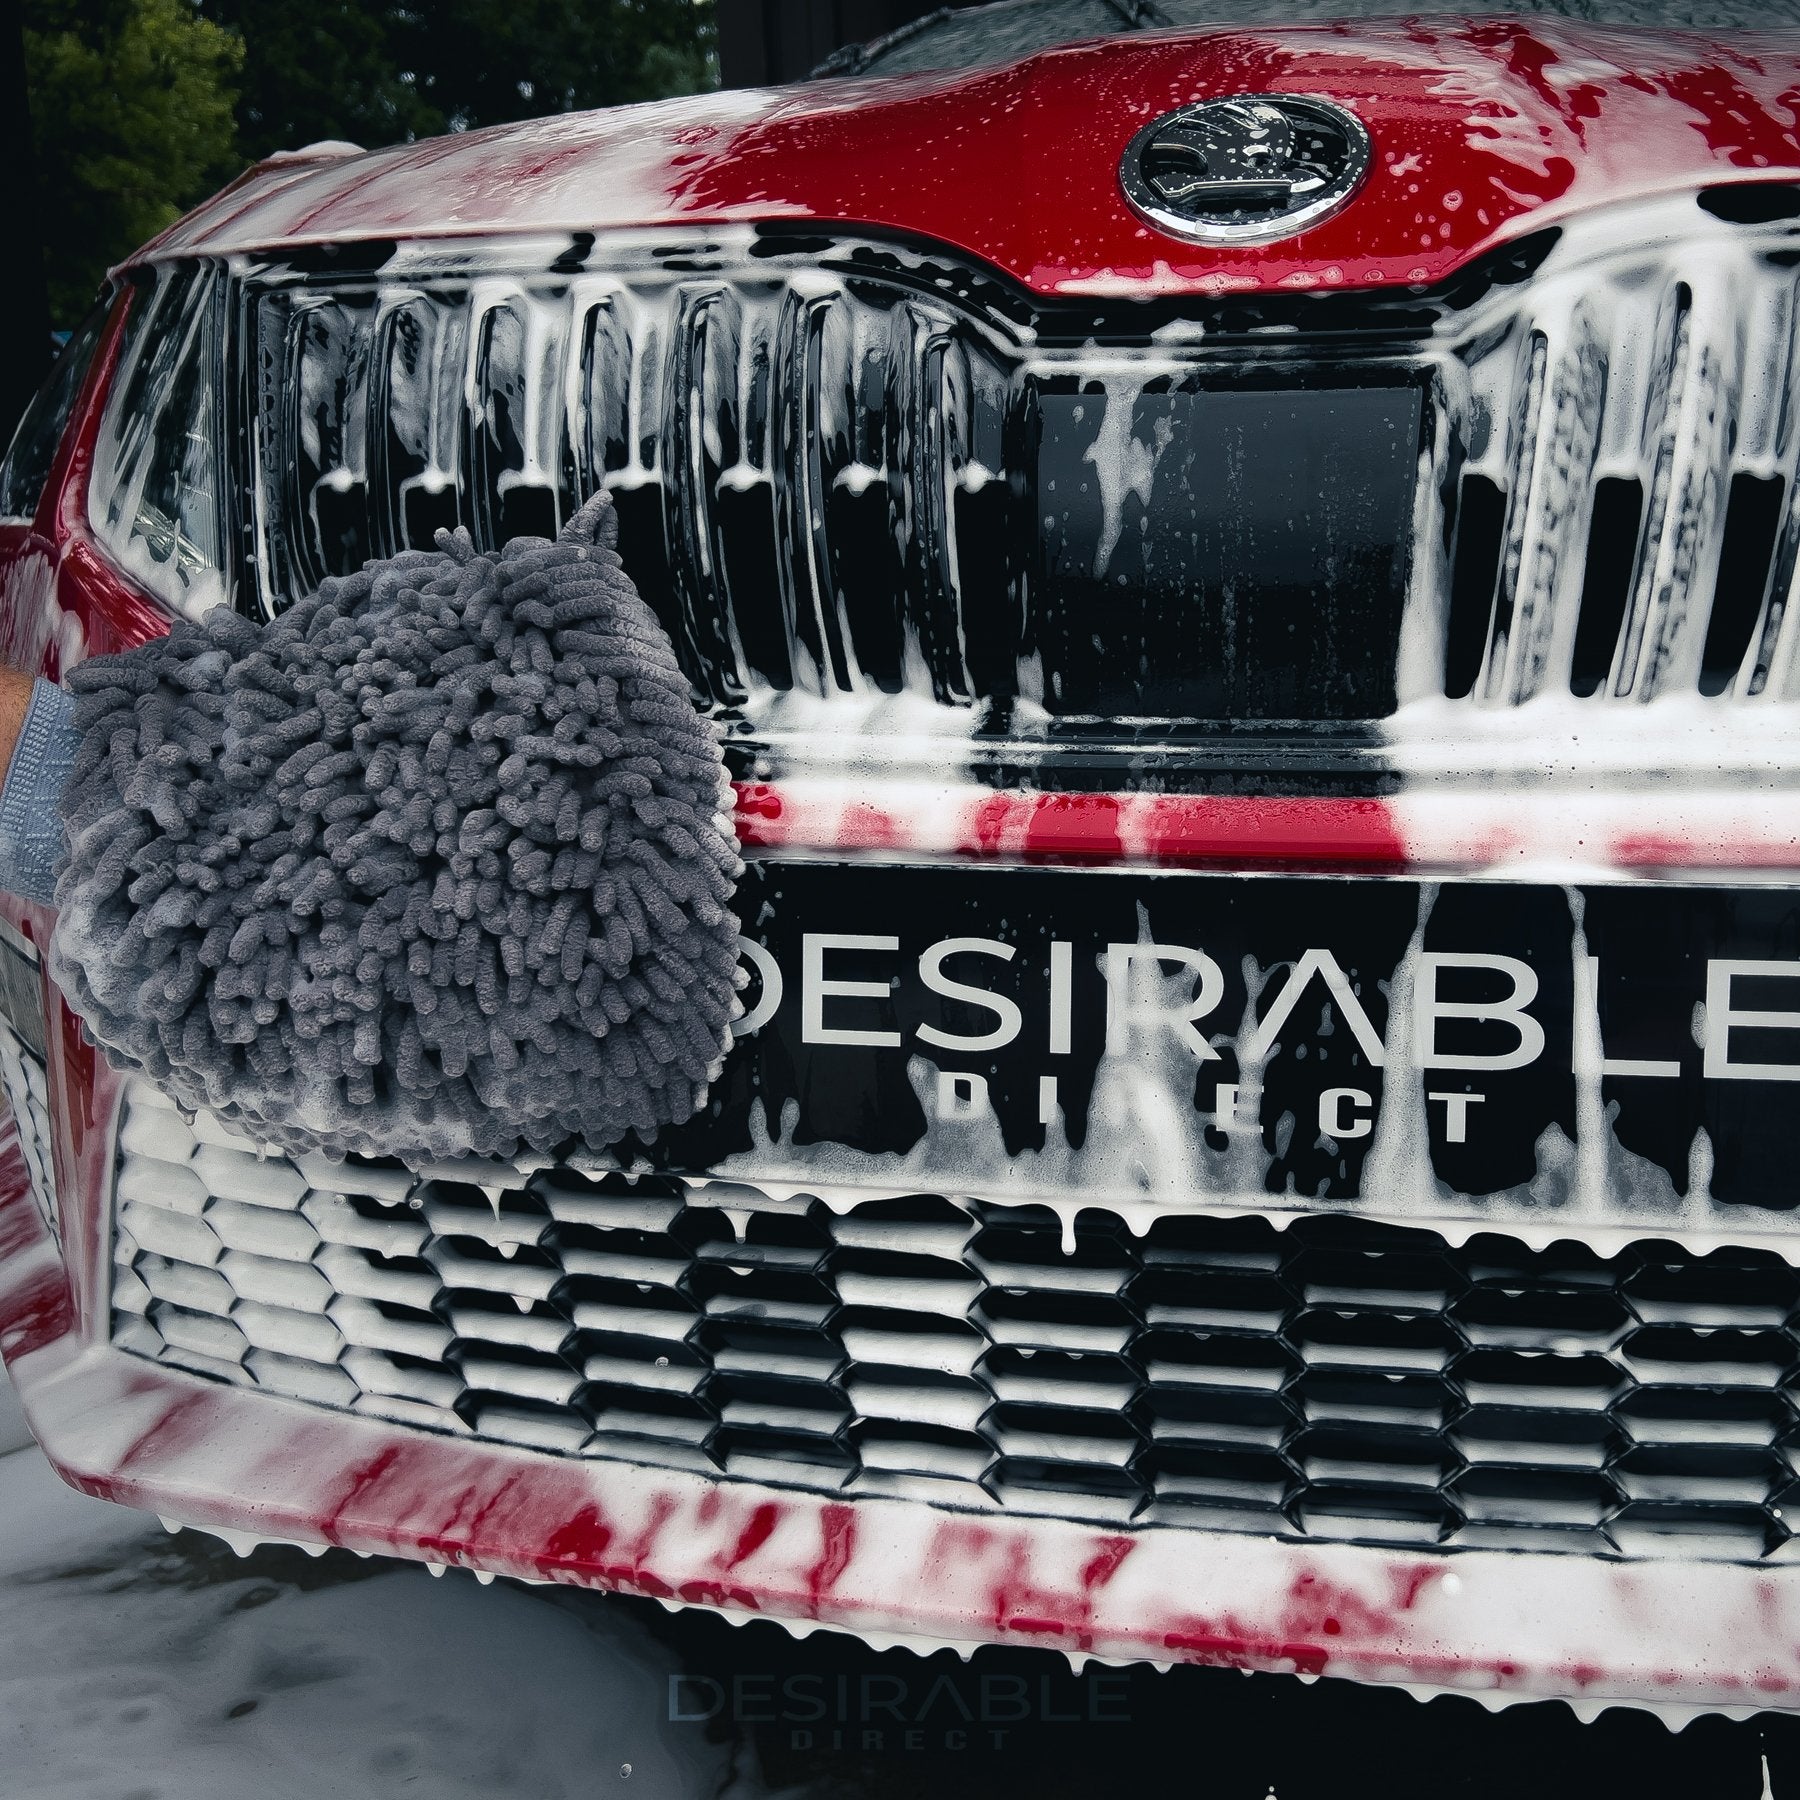 Car care noodle chenille grey wash mitt cleaning the front of a red car covered in car shampoo. The registration plate is covered by a black branded plate with desirable direct printed on the front.